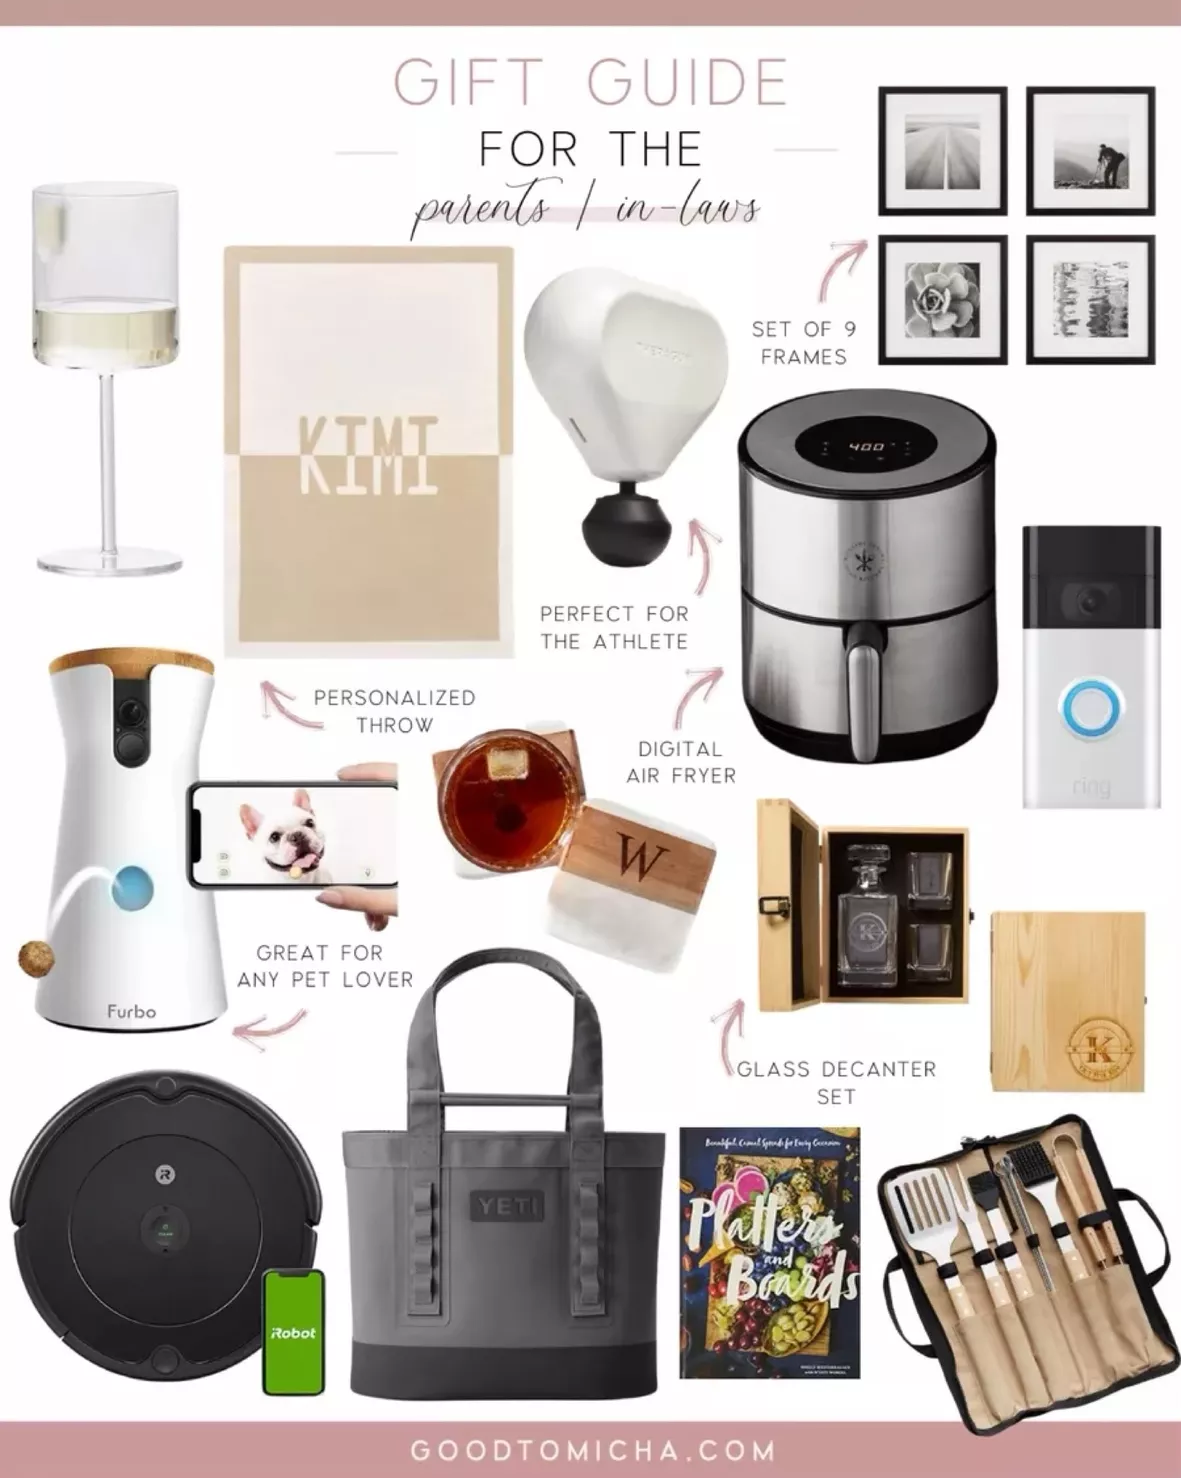 The Ultimate Gift Guide for Parents and In-Laws!